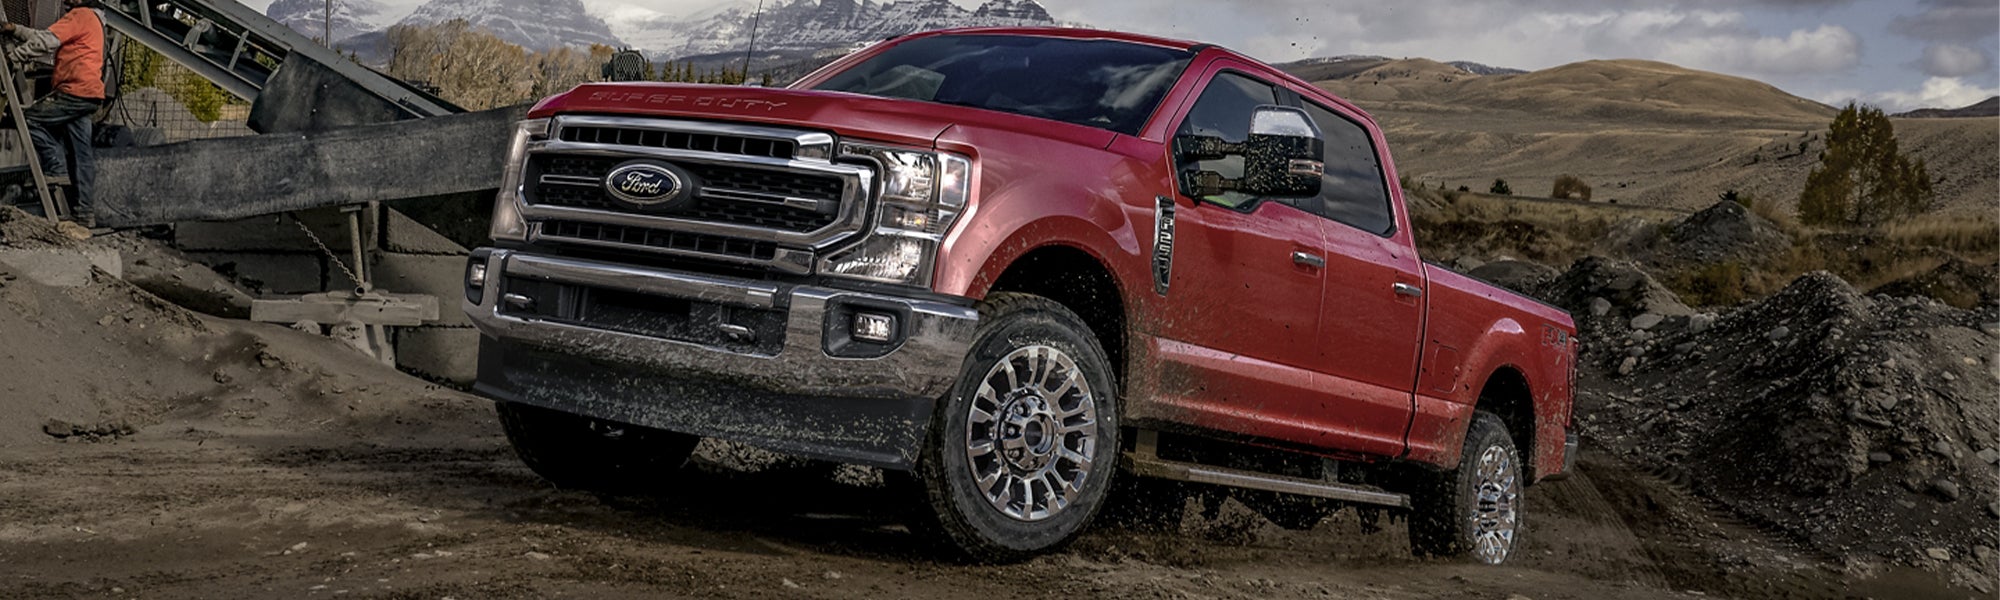 2020 Ford Super F-250 Towing Capacity